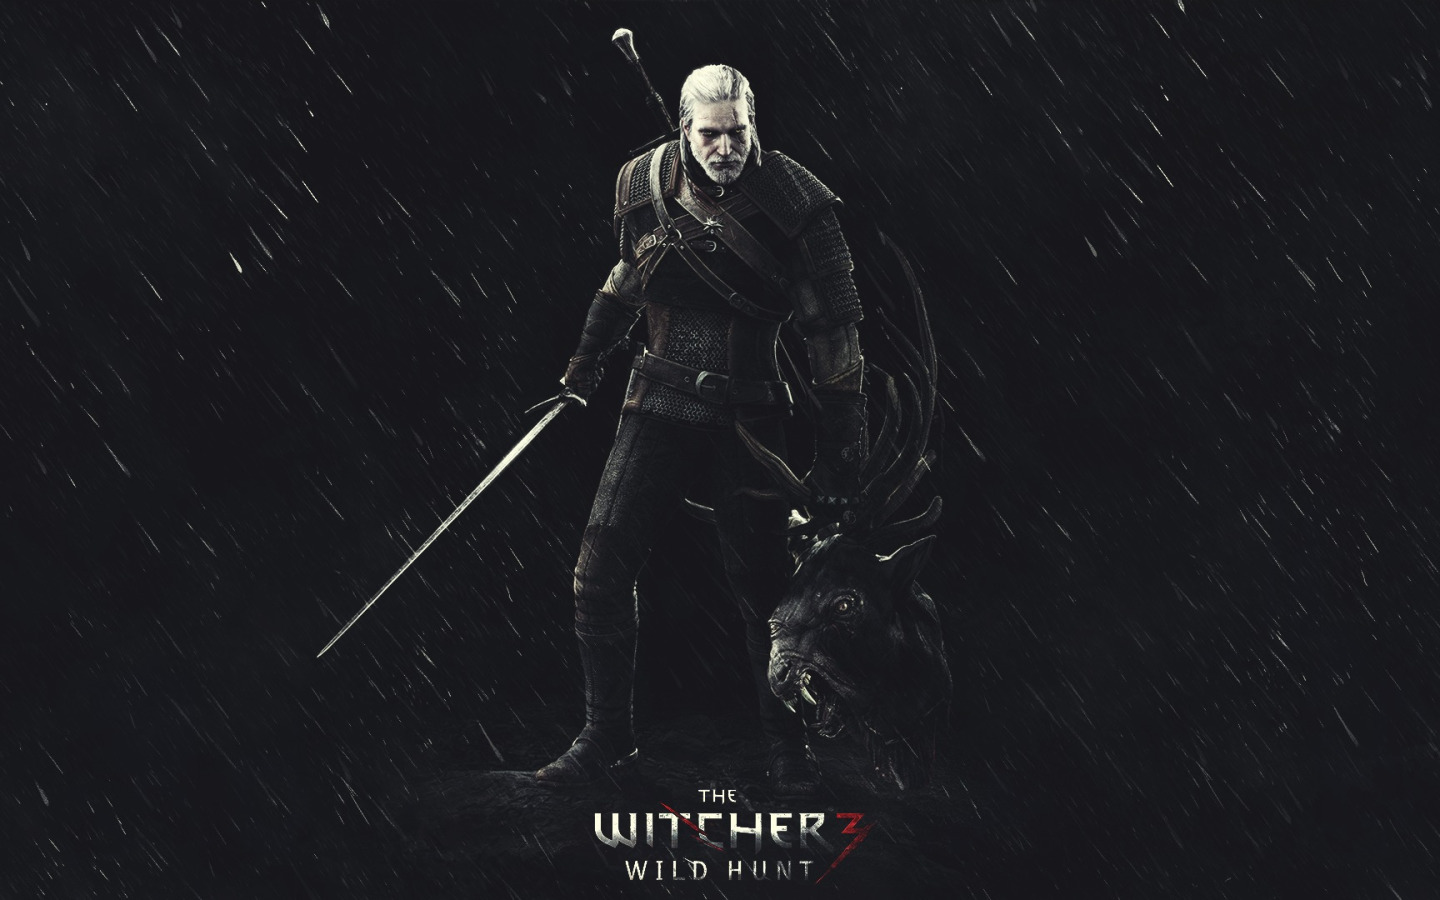 The witcher 3 brutal blood фото 87